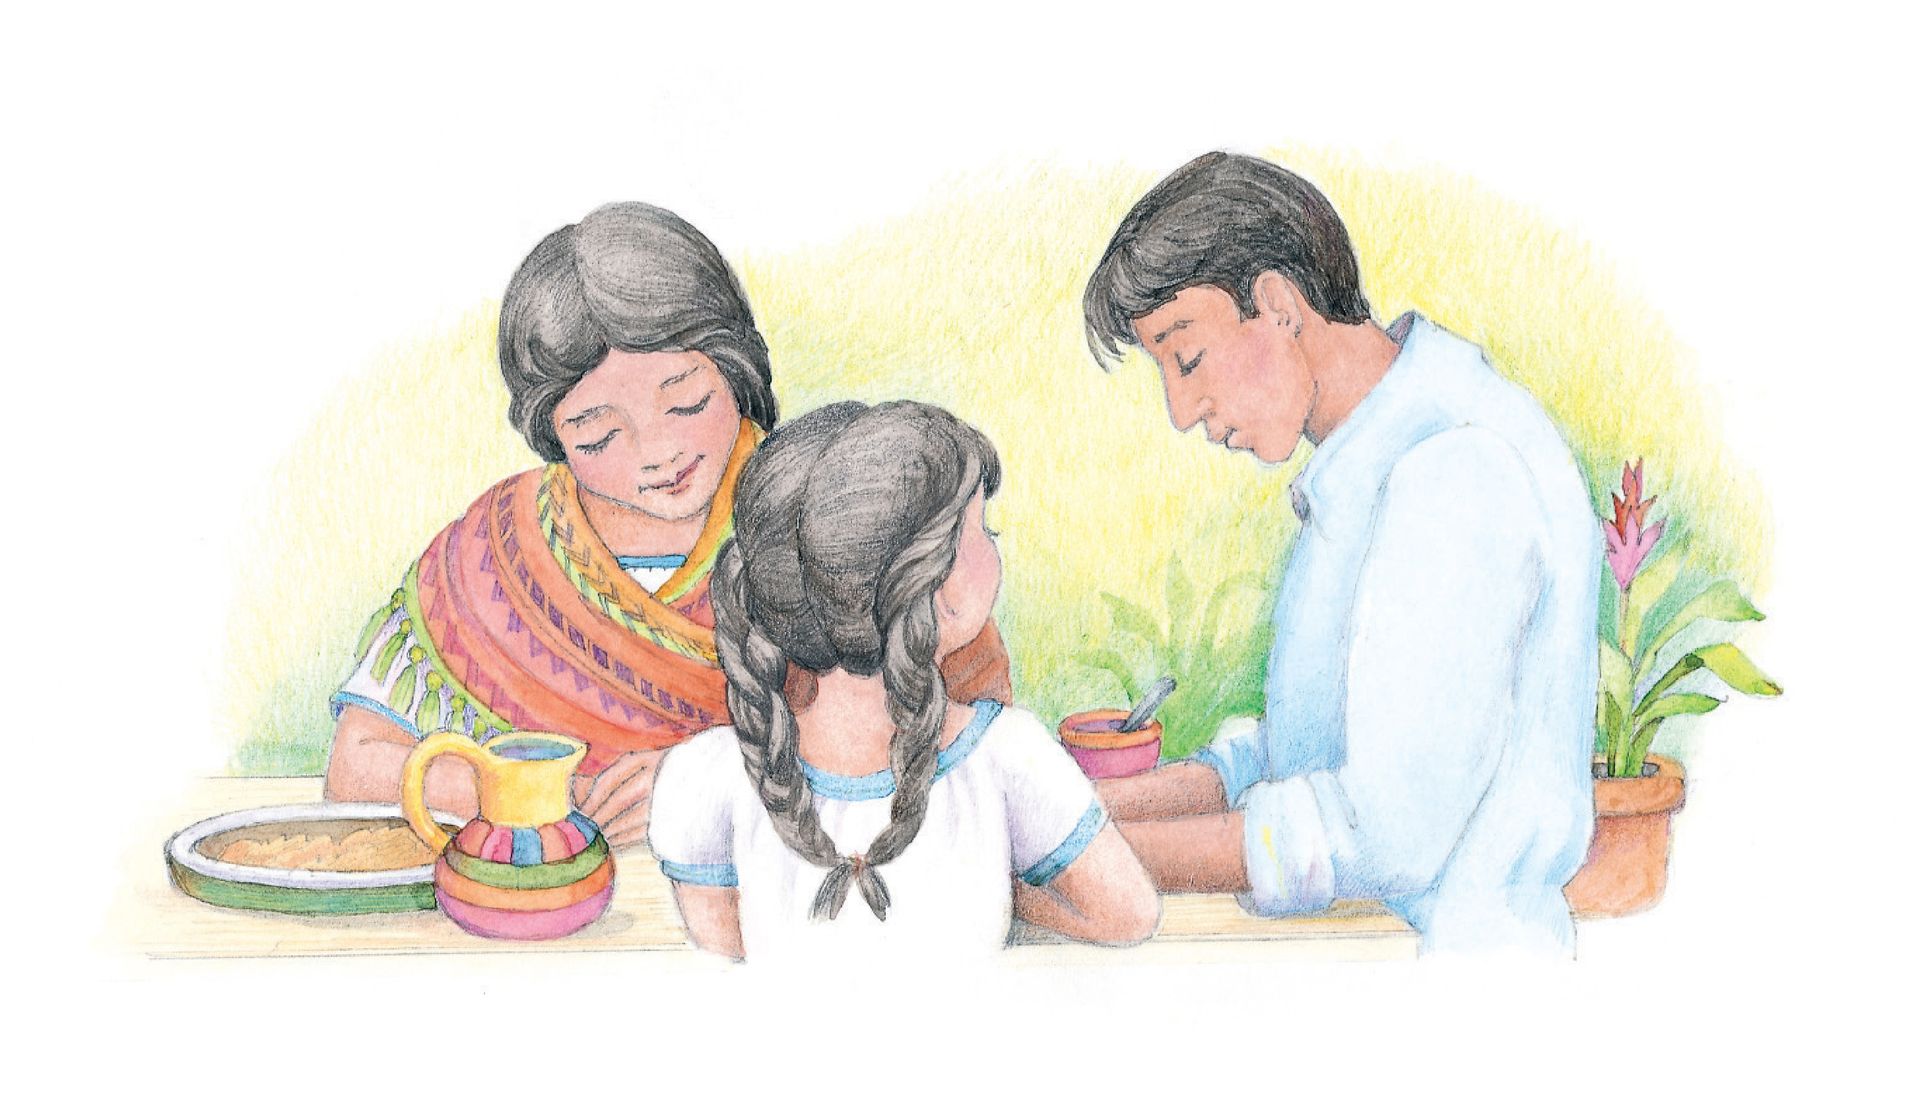 A family praying at the table together. From the Children’s Songbook, page 21, “For Health and Strength” and “For Thy Bounteous Blessings”; watercolor illustration by Phyllis Luch.